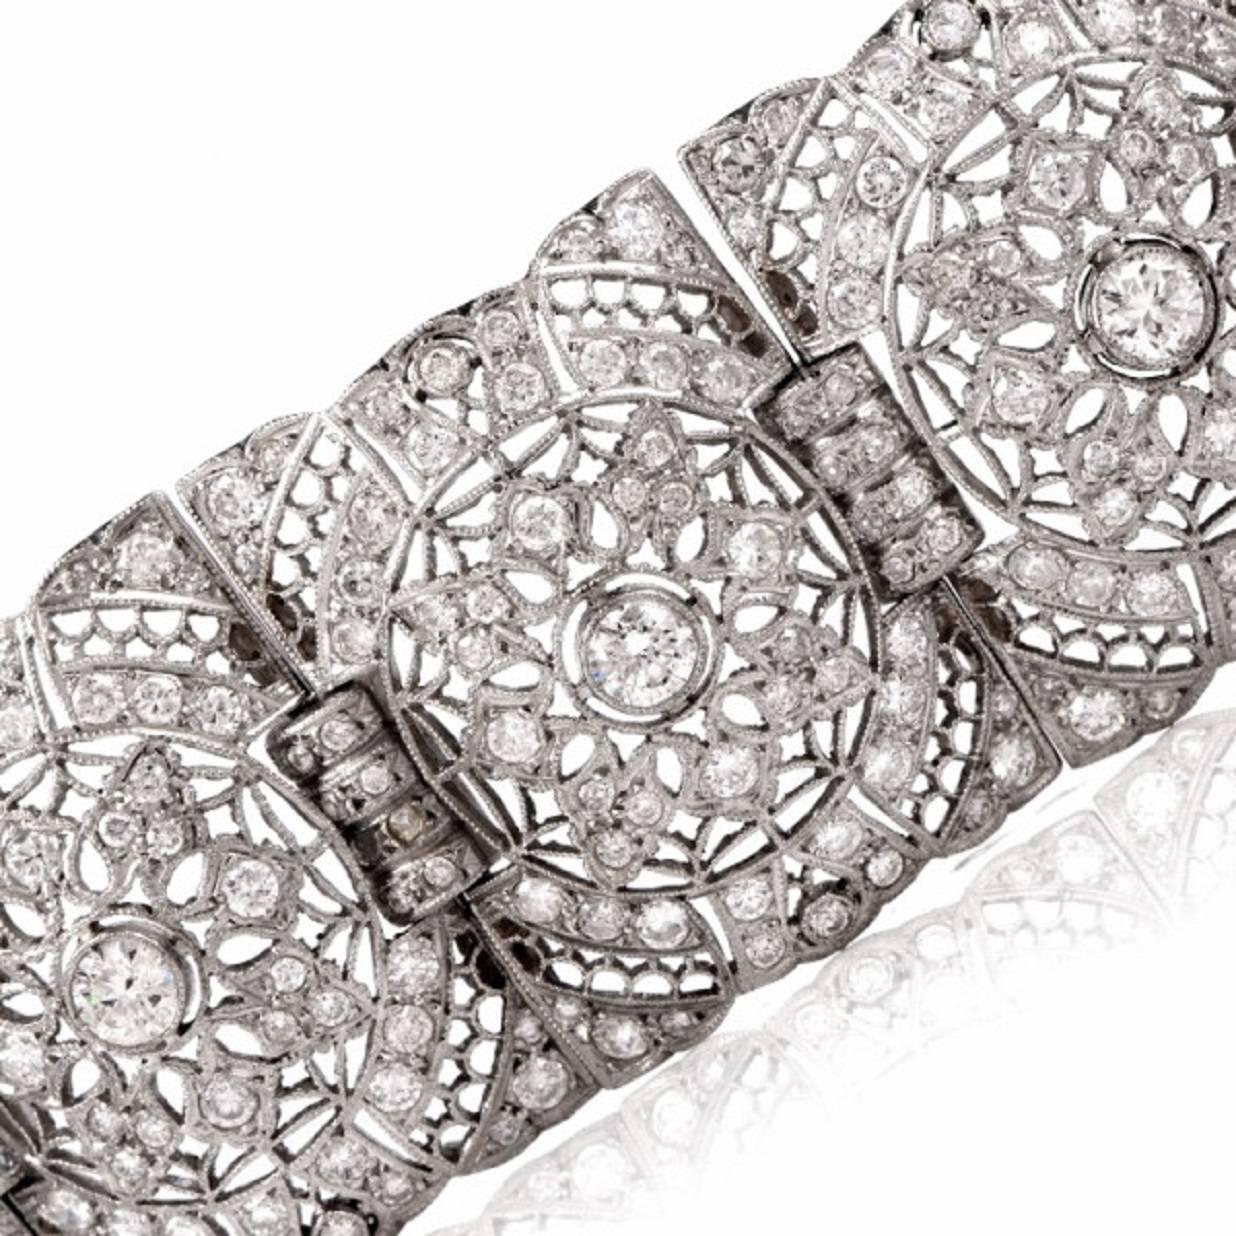 This  sparkling antique diamond bracelet with immaculate filigree enhancements throughout is crafted in solid platinum, weighing 71.7 grams and measuring 7. 1/4